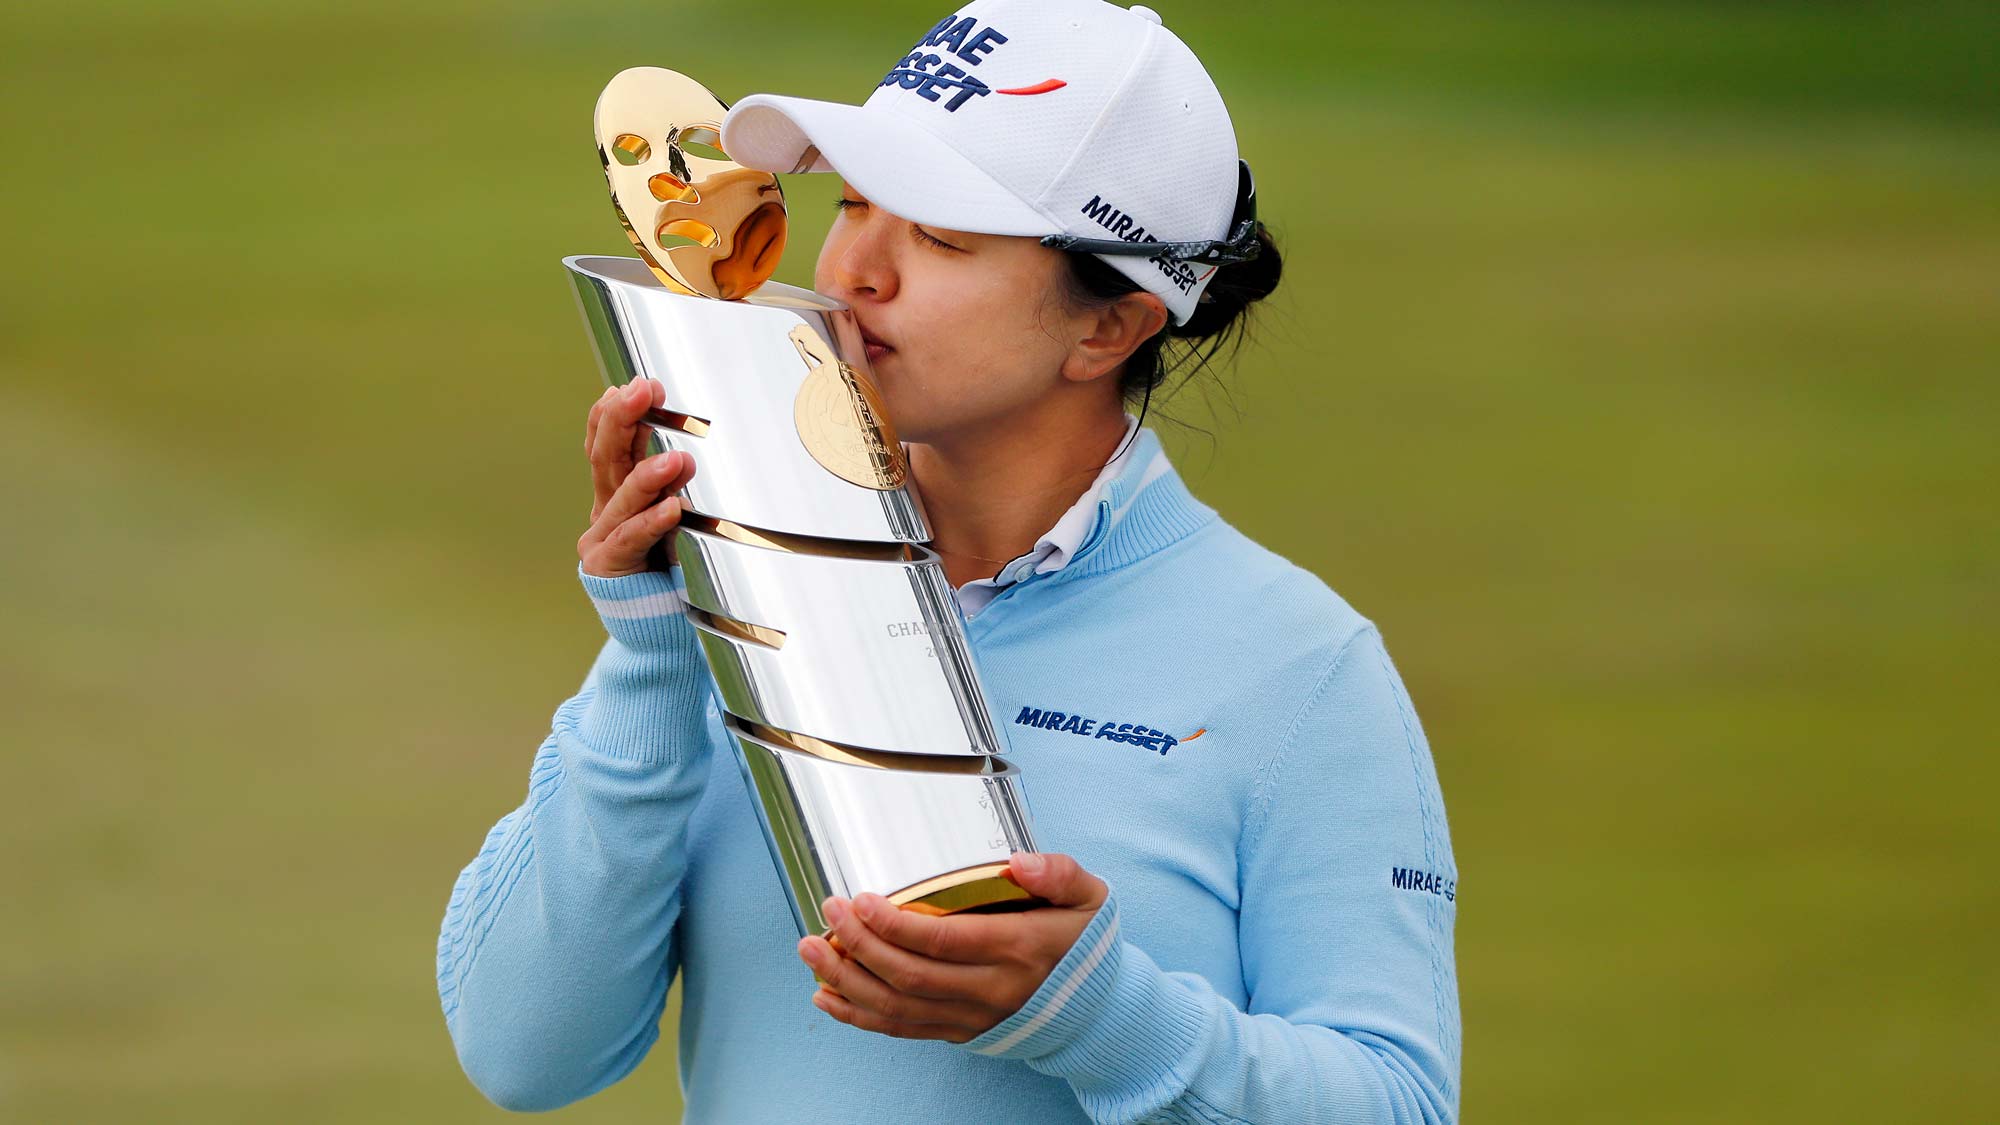 Sei Young Kim has her #BagsPacked for the 2020 Diamond Resorts Tournament of Champions after her victory at the 2019 LPGA MEDIHEAL Championship